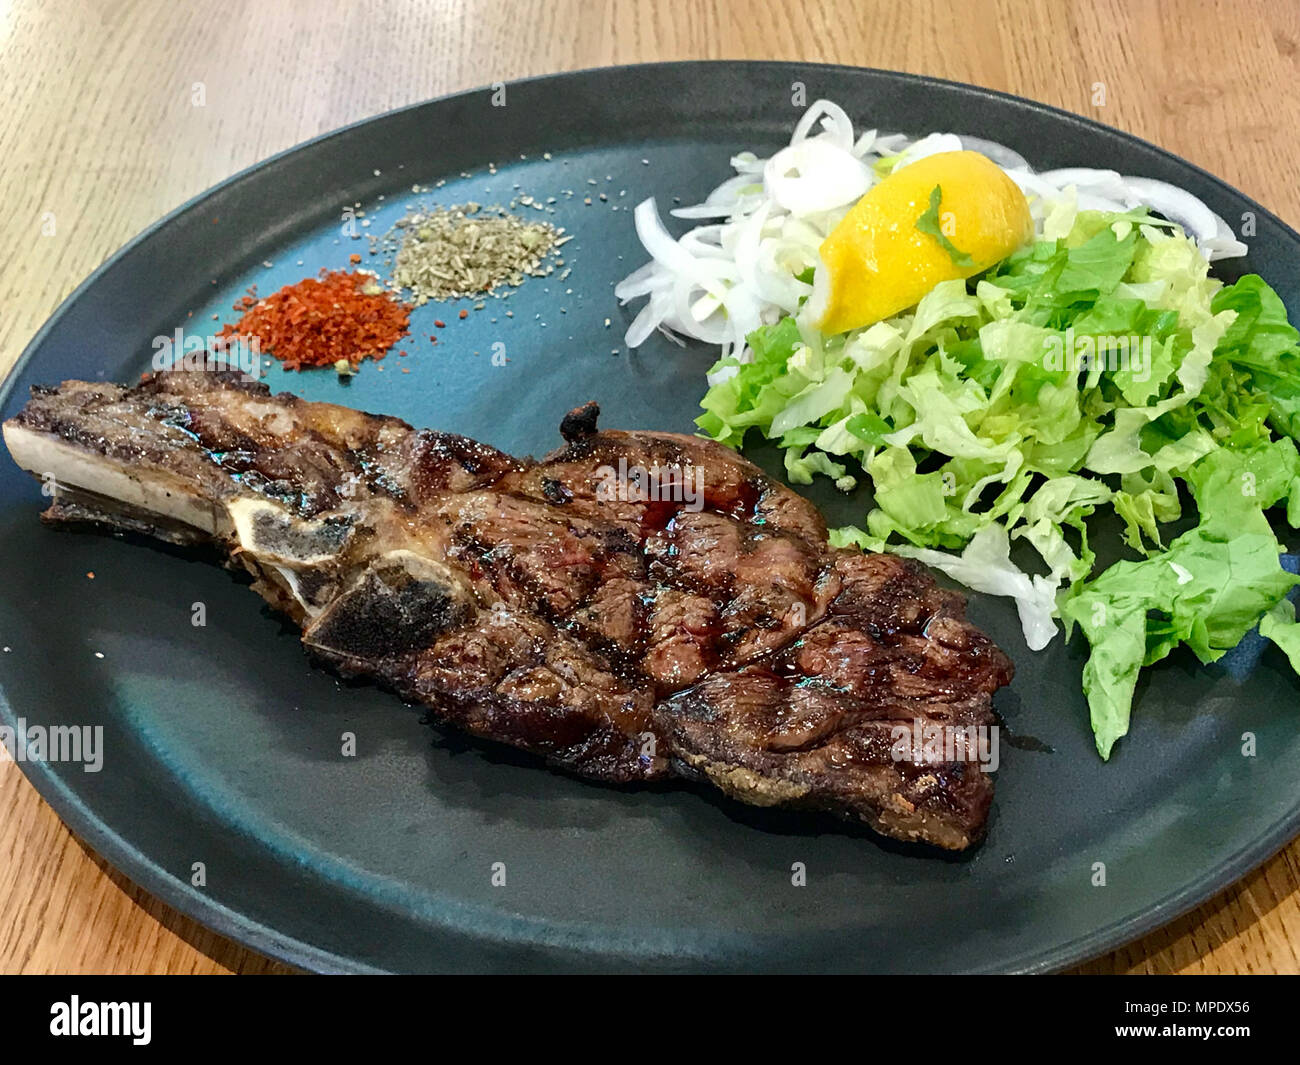 Big Veal Chop Steak with Salad served in Black Plate. Organic Food. Stock Photo